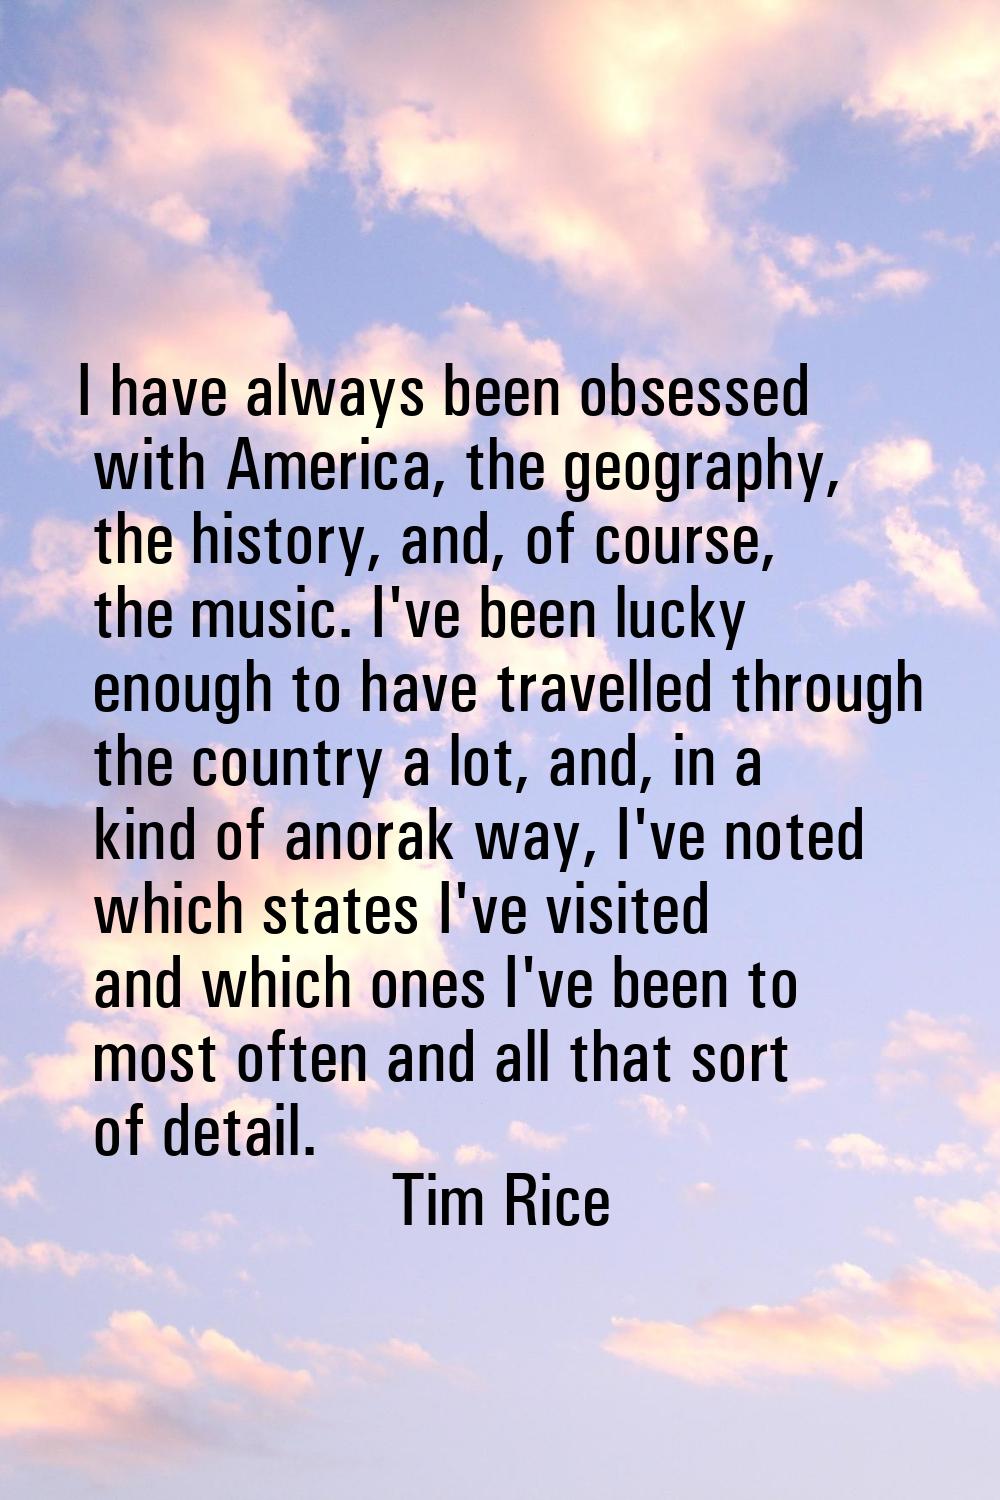 I have always been obsessed with America, the geography, the history, and, of course, the music. I'